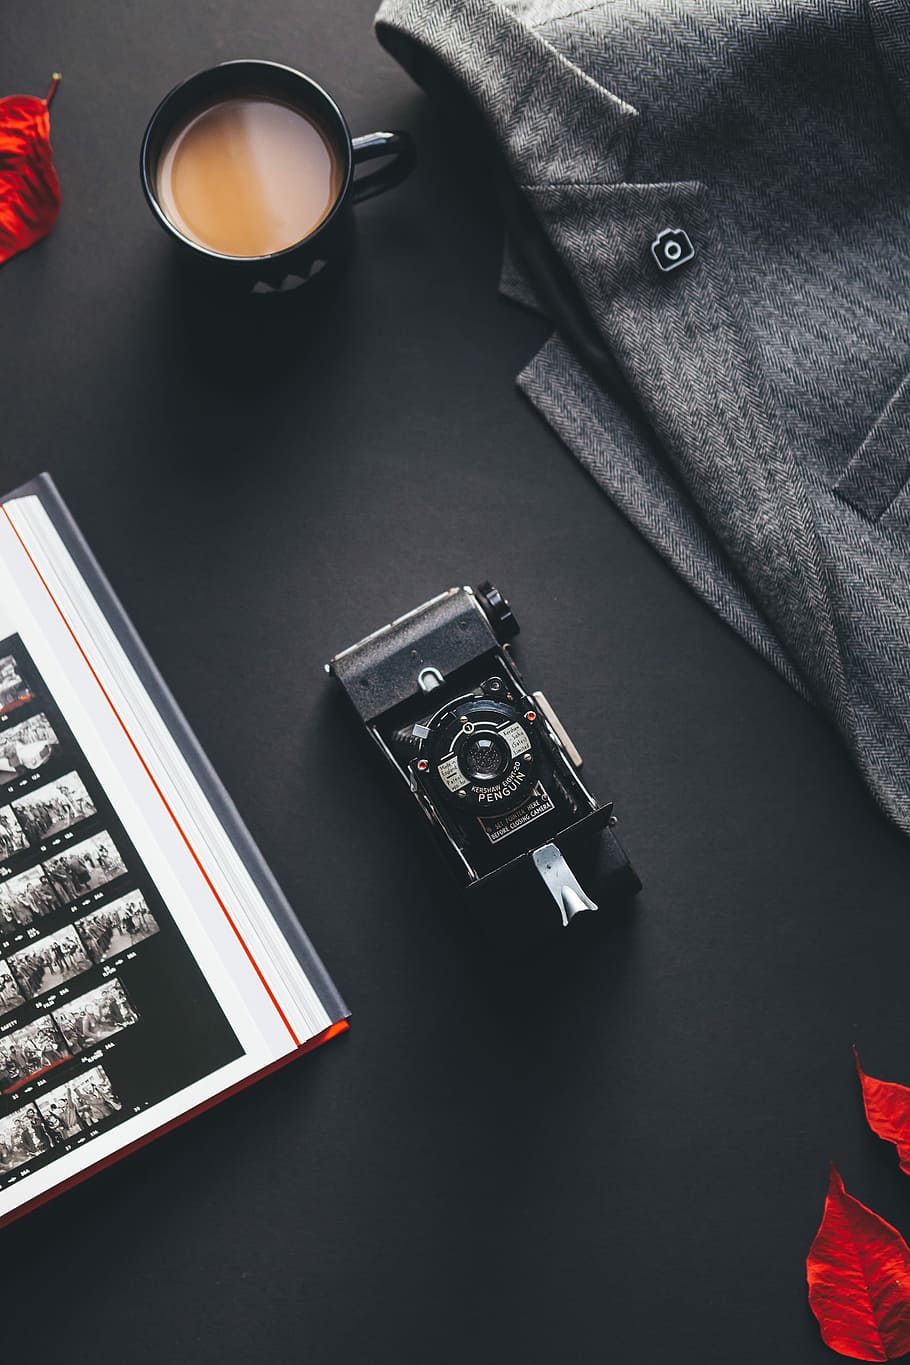 black film camera near gray suit jacket, black ceramic mug with coffee inside beside gray suit jacket and black camera on table, HD wallpaper